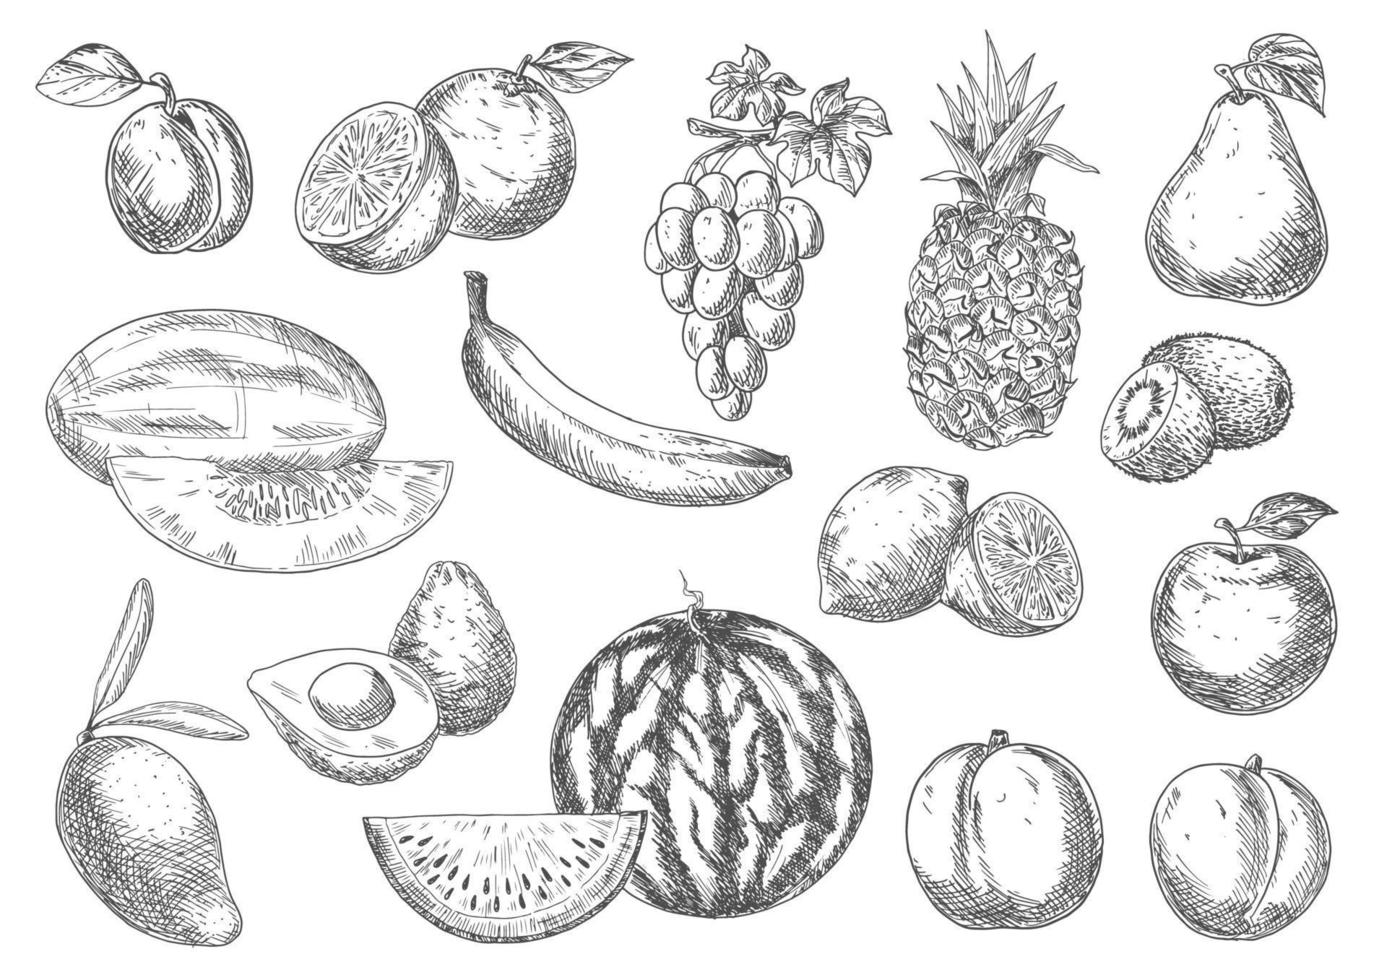 Enjoyable flavorful fresh fruits sketch icons vector